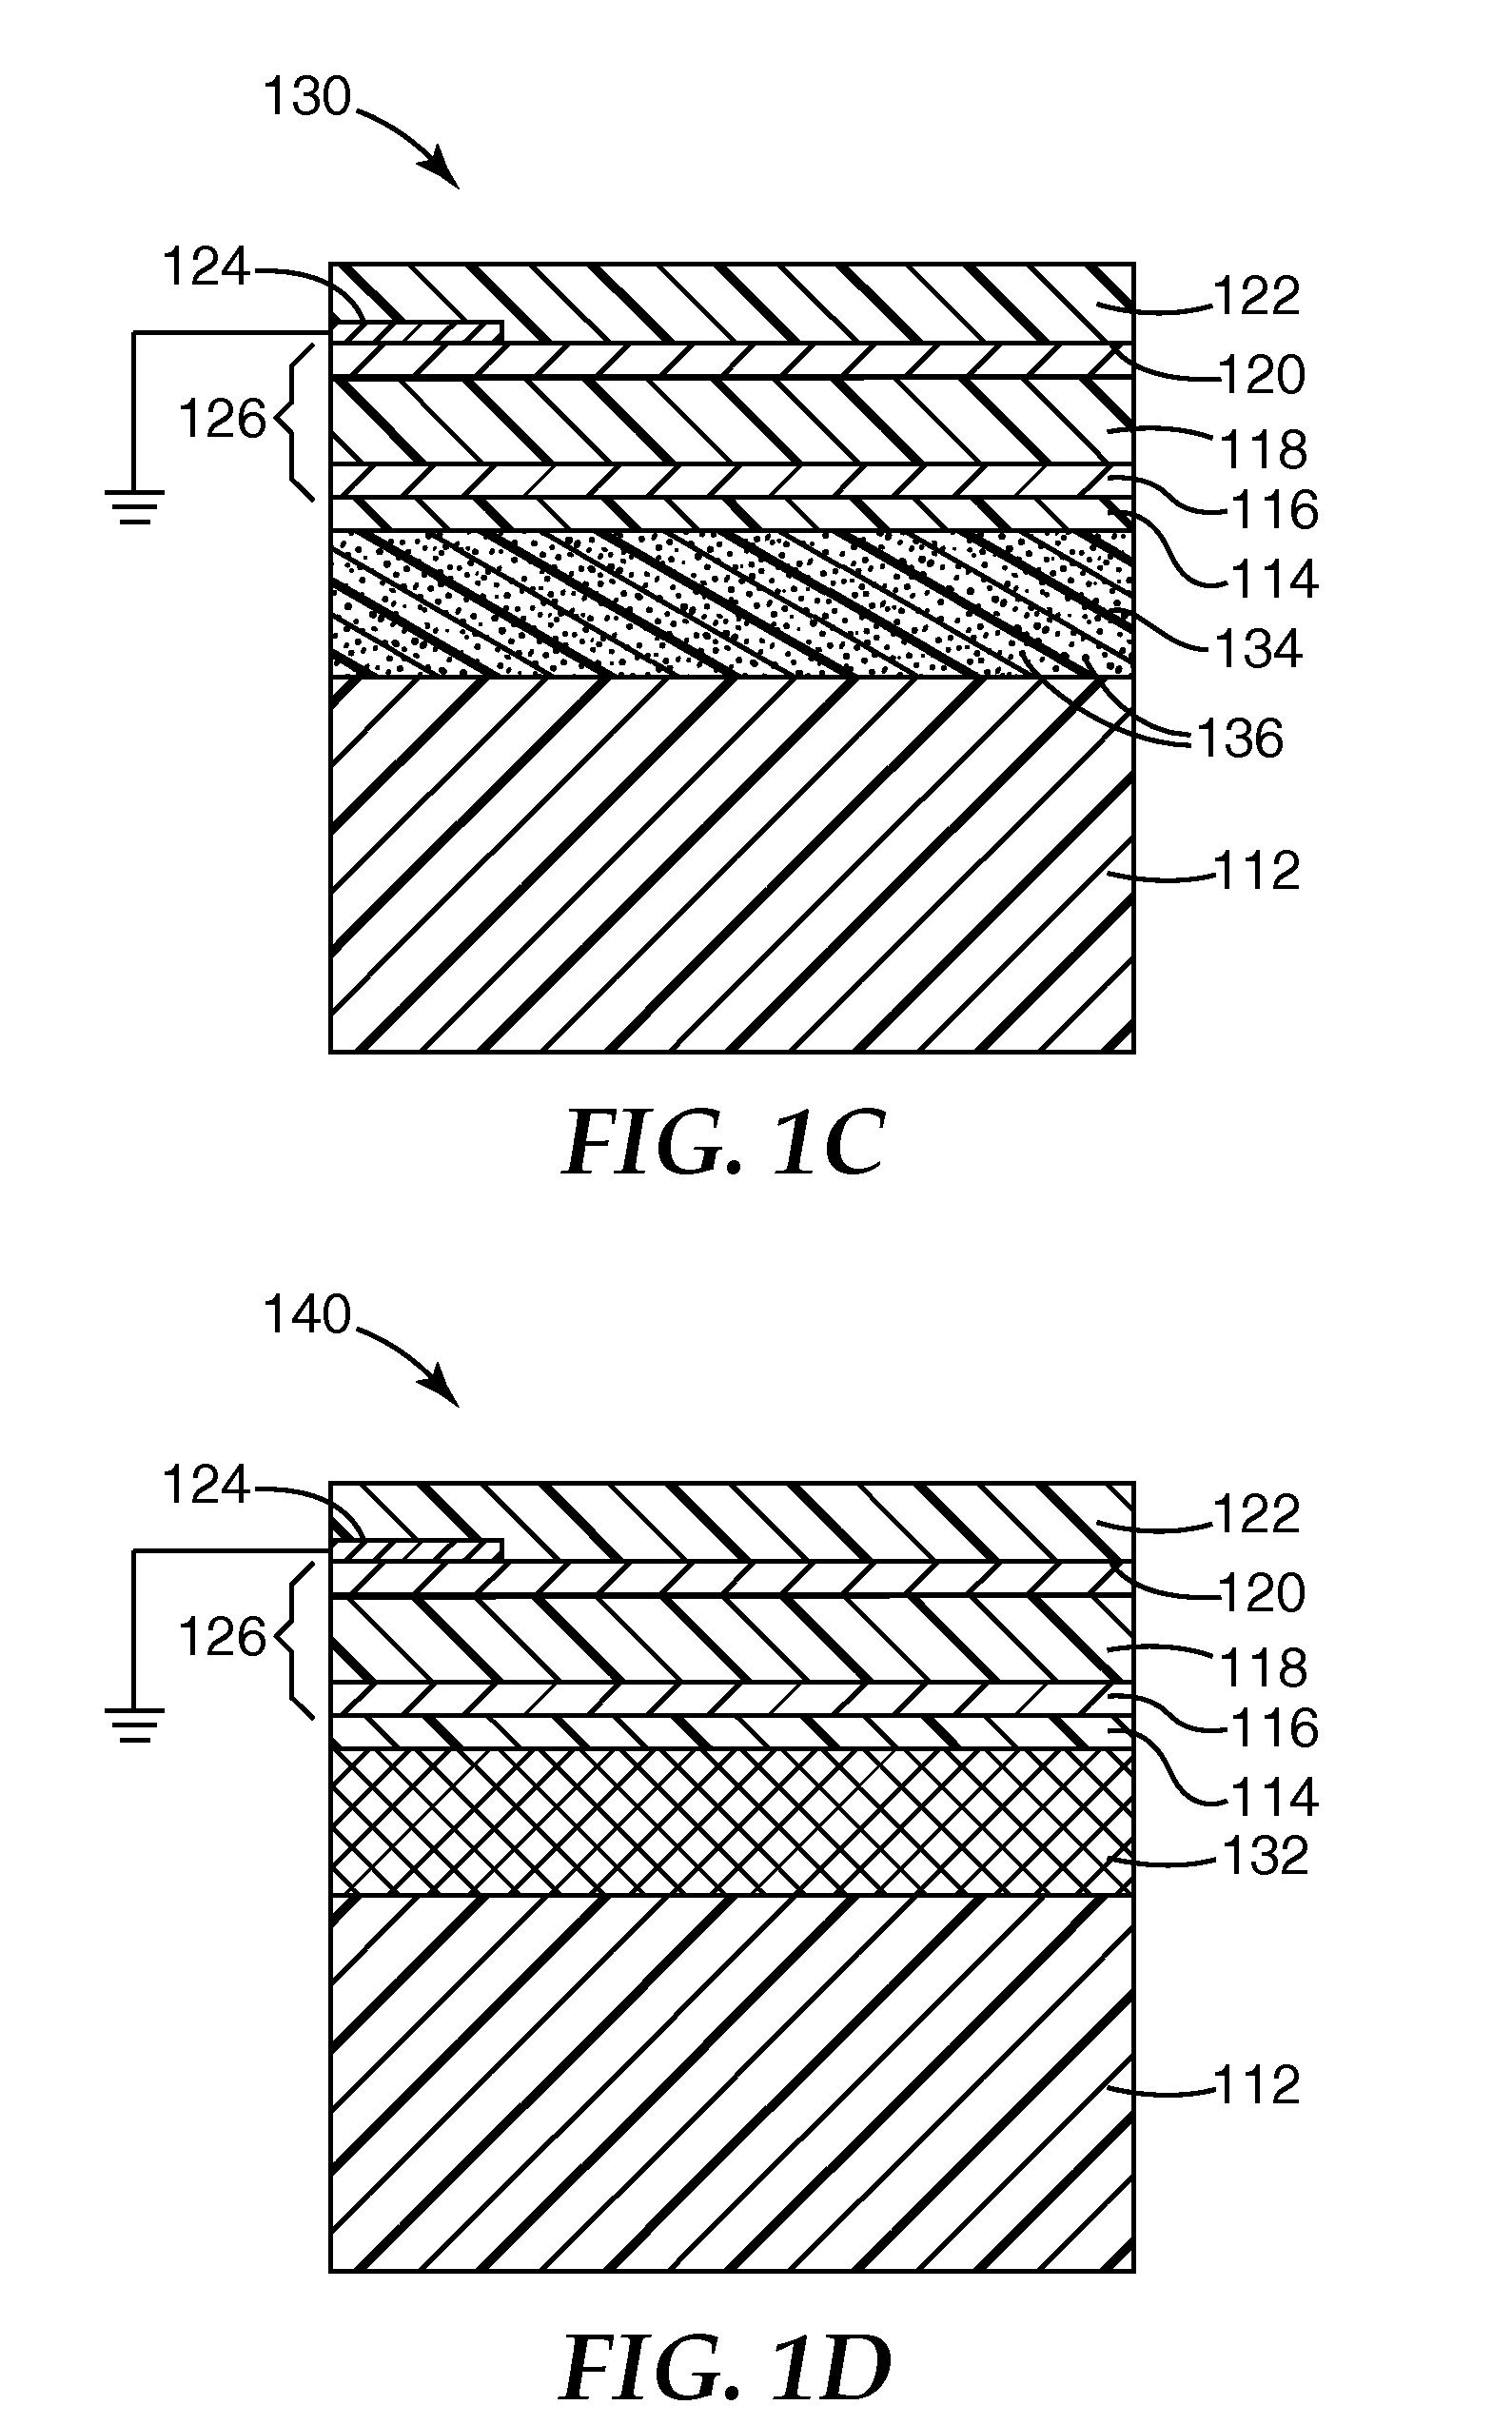 Nucleation layer for thin film metal layer formation